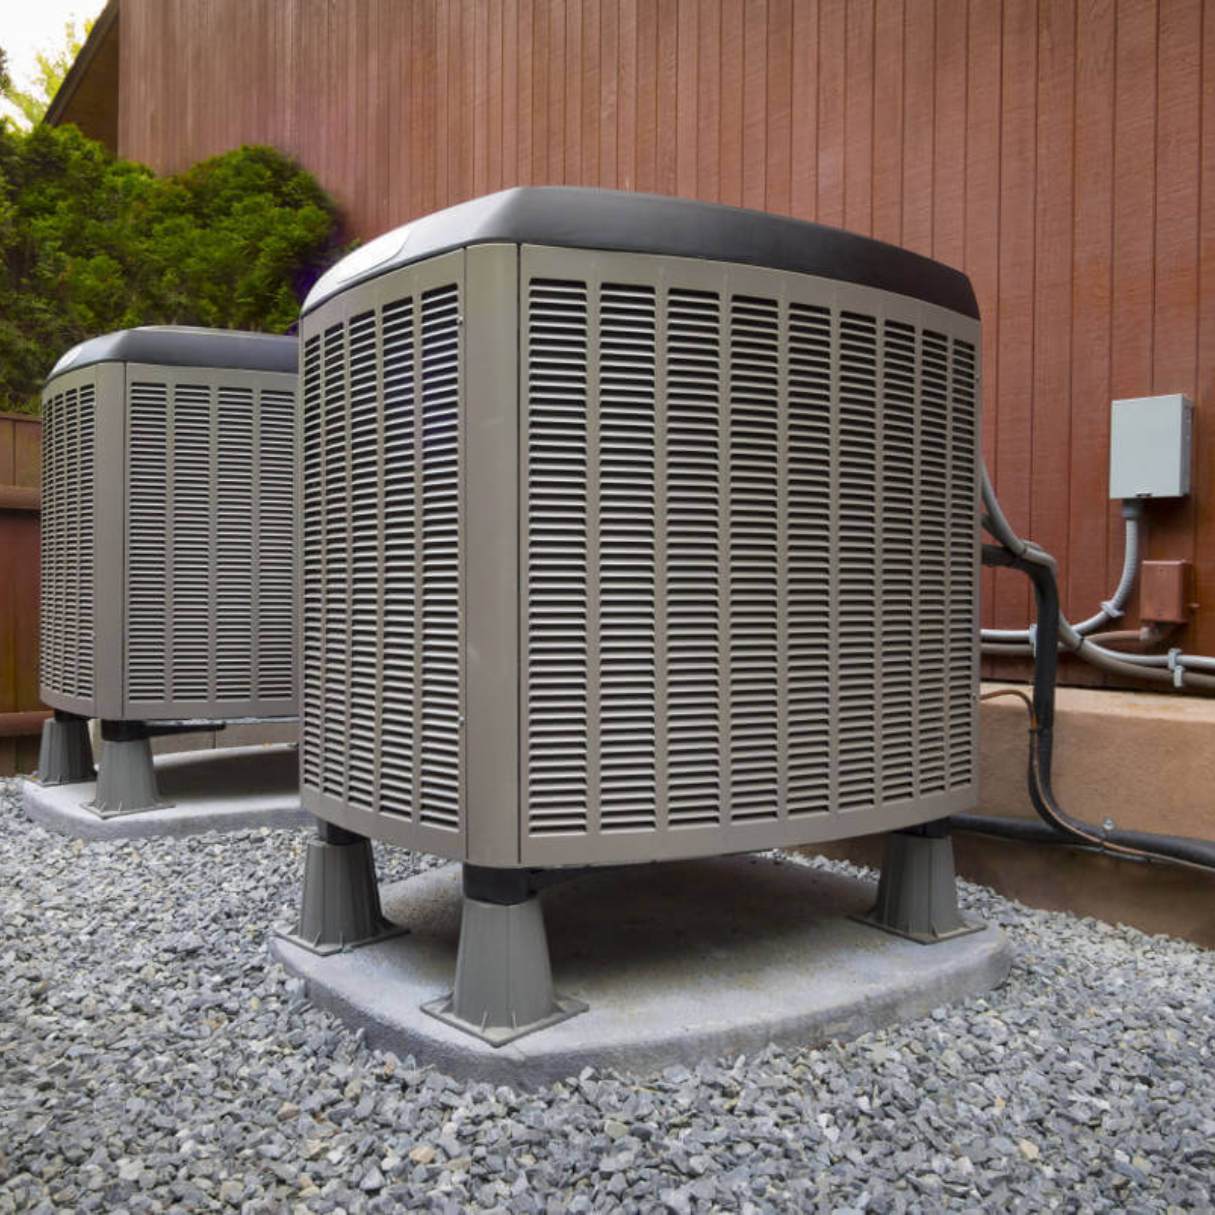 How Cold Should HVAC Air Be